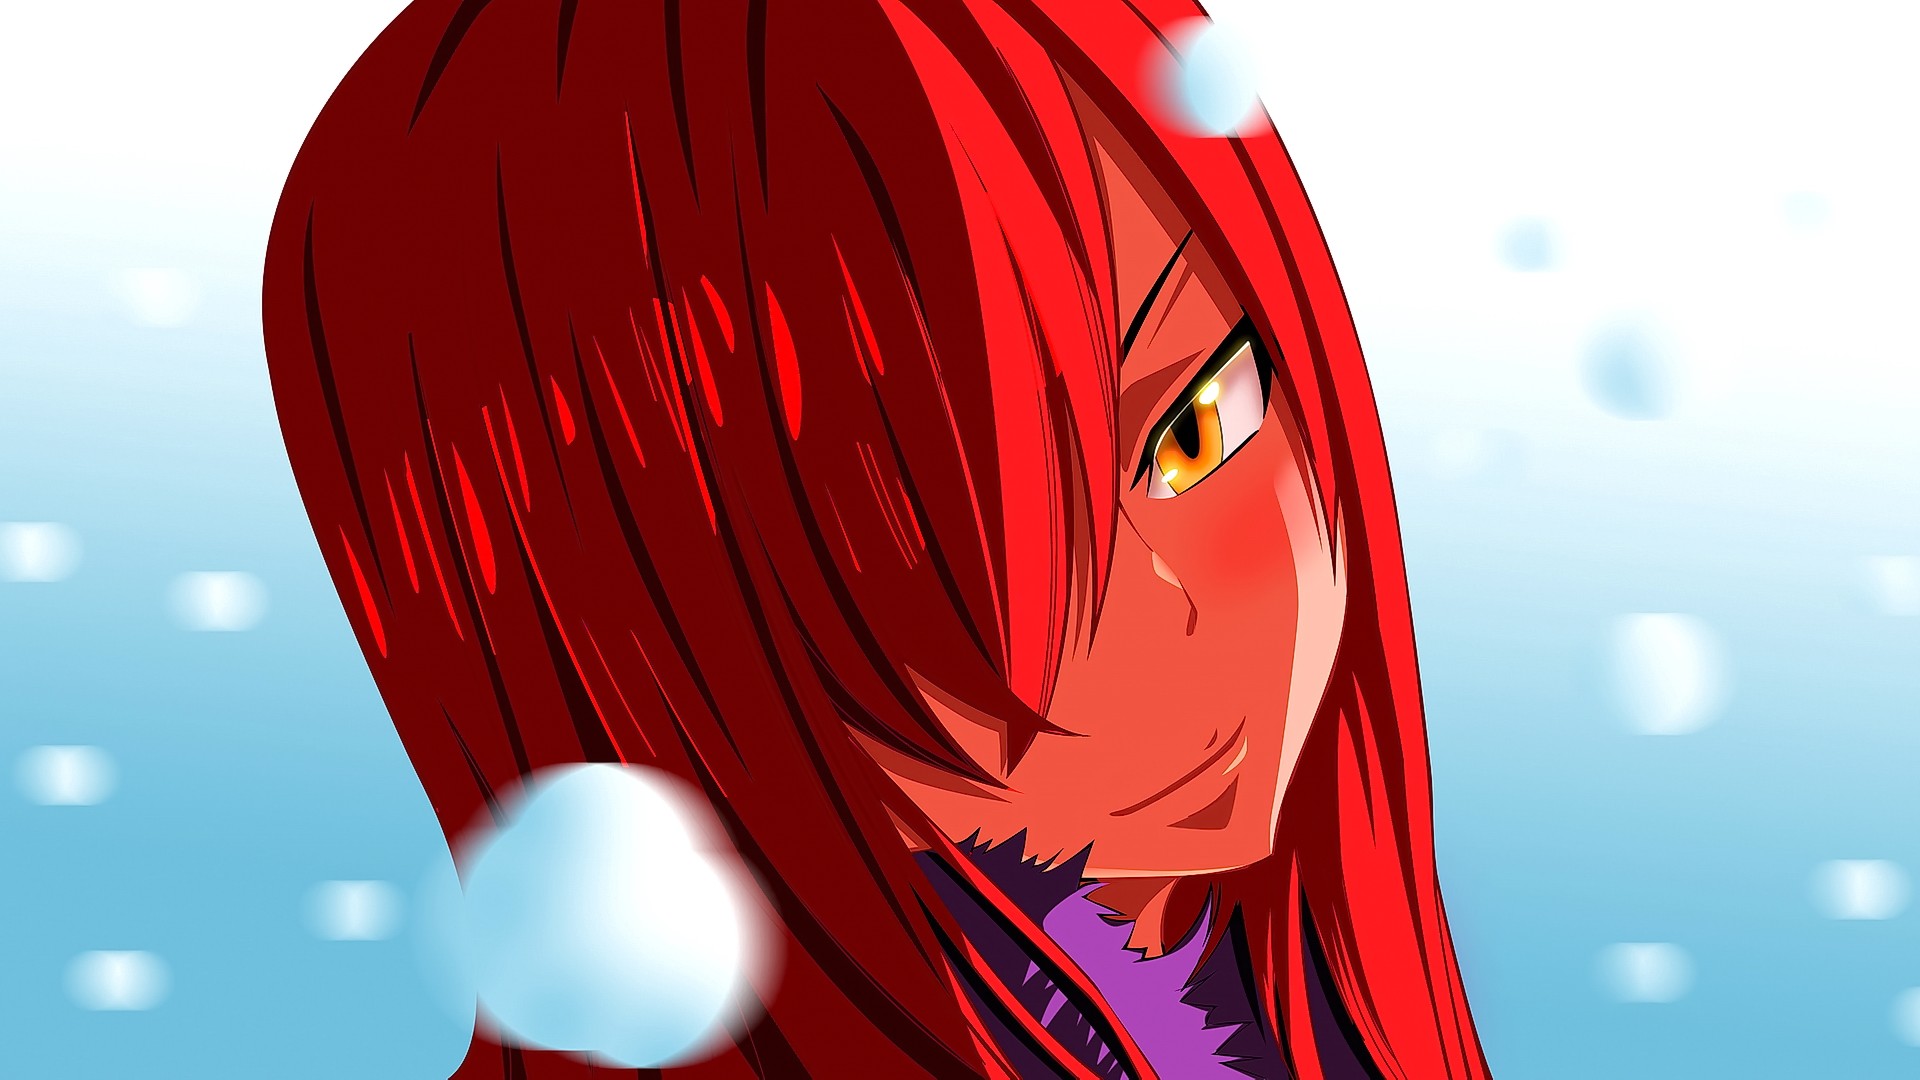 Anime Anime Girls Scarlet Erza Fairy Tail Redhead Yellow Eyes Smiling Looking At Viewer 1920x1080